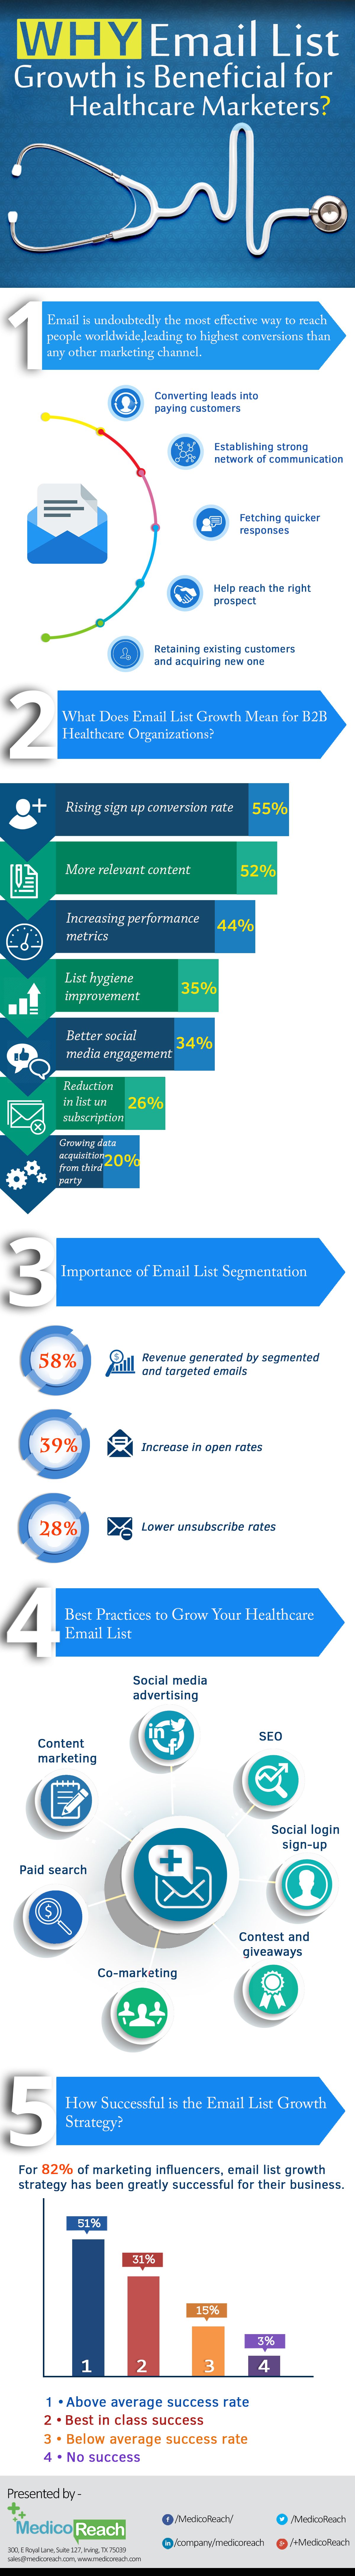 Why Email list Growth is Beneficial for Healthcare Marketers